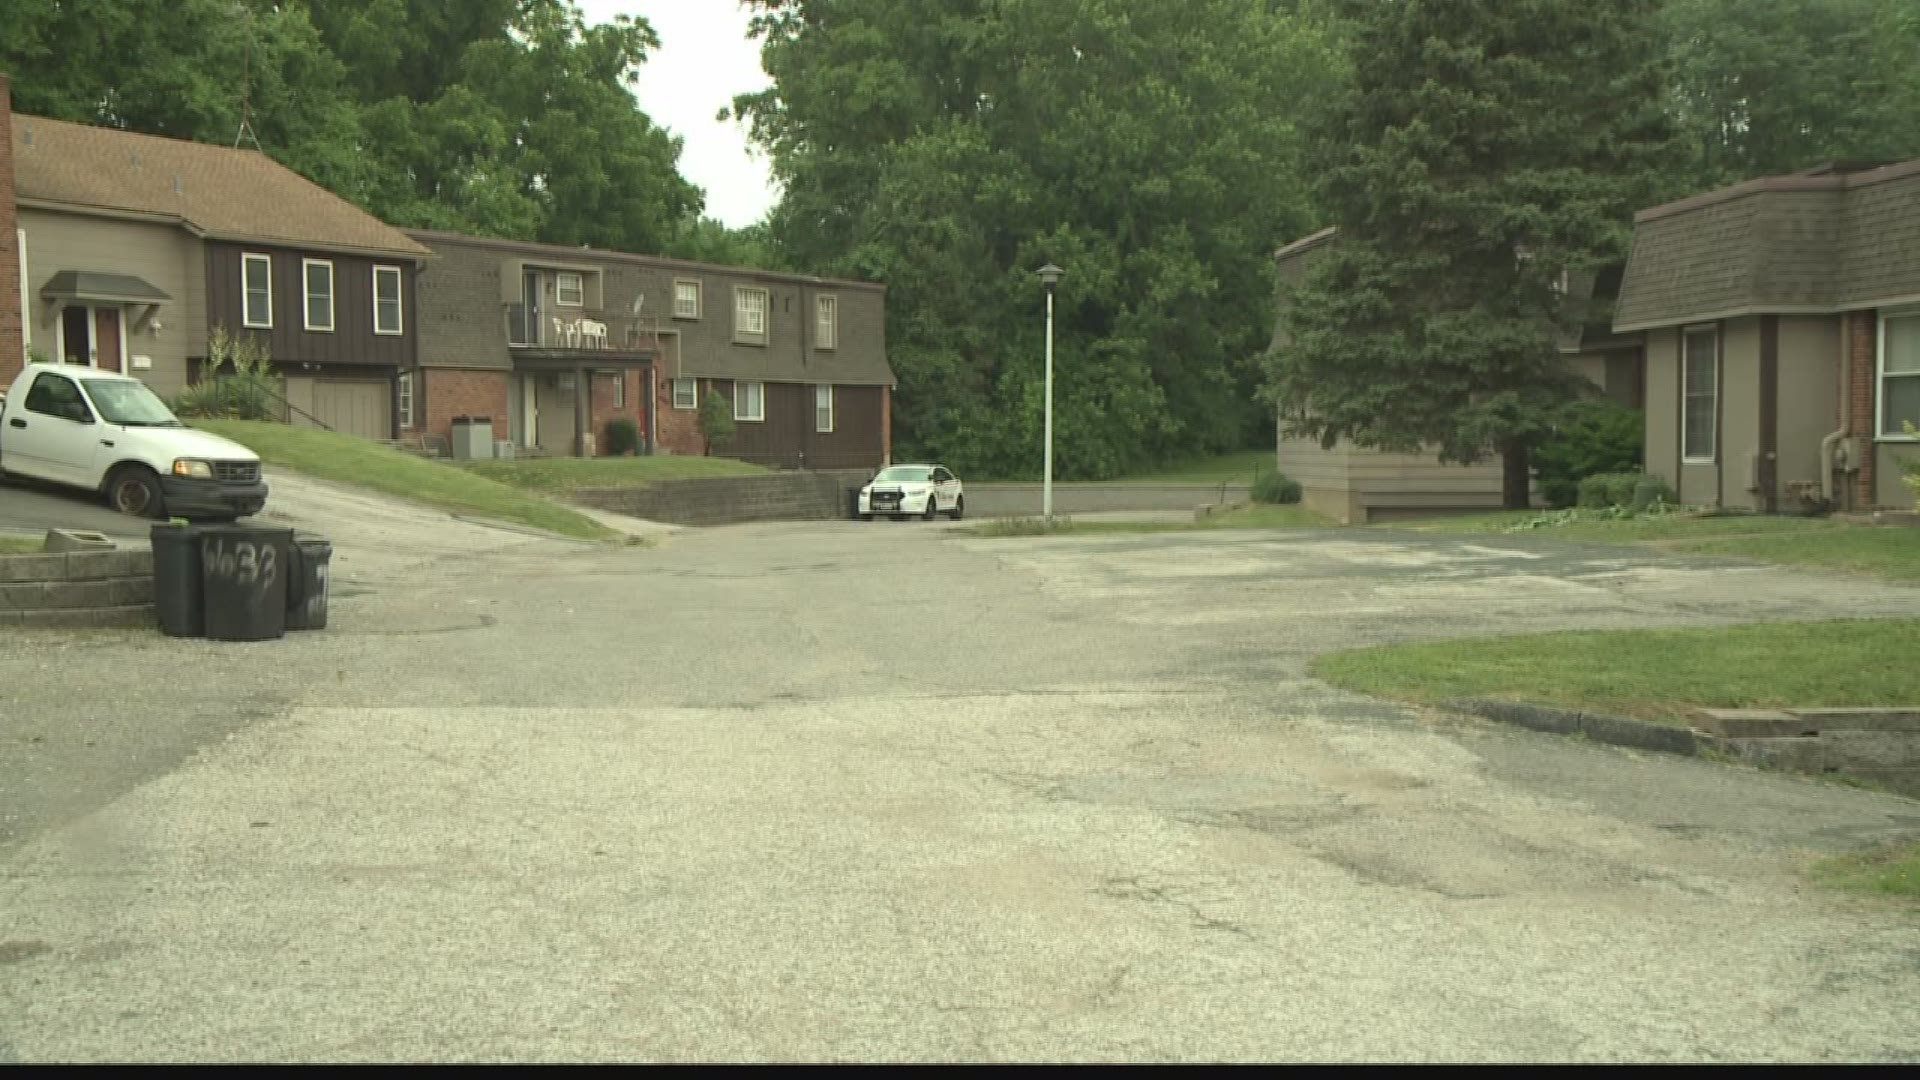 Woman, baby found dead in north St. Louis County apartment identified | www.bagssaleusa.com